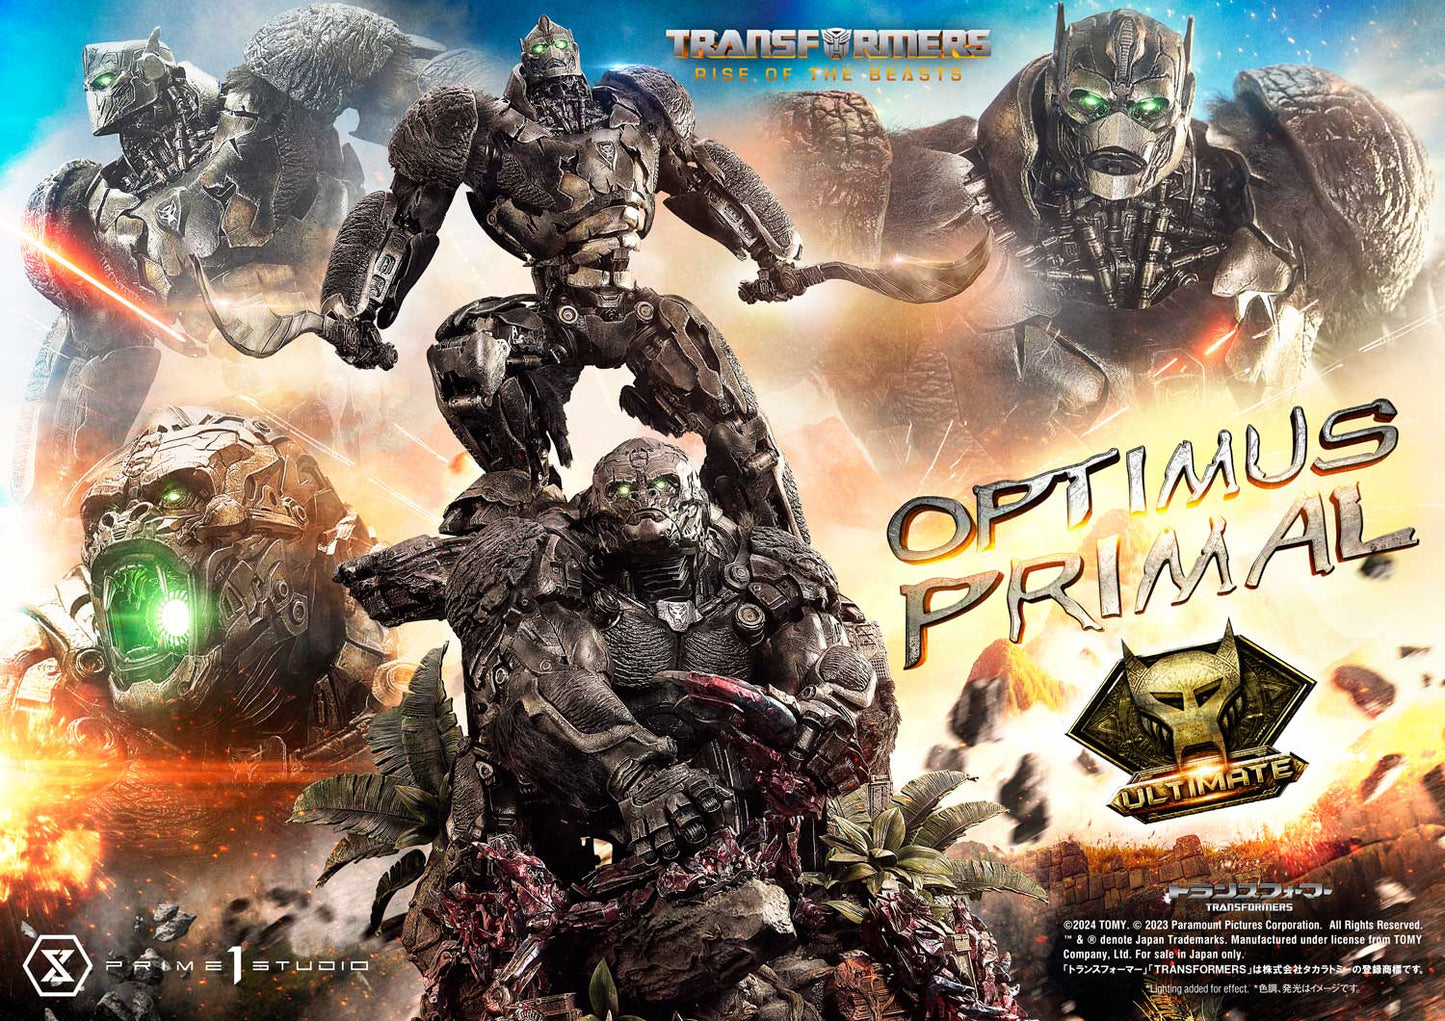 Museum Masterline "Transformers: Rise of the Beasts" Optimus Primal Ultimate Edition